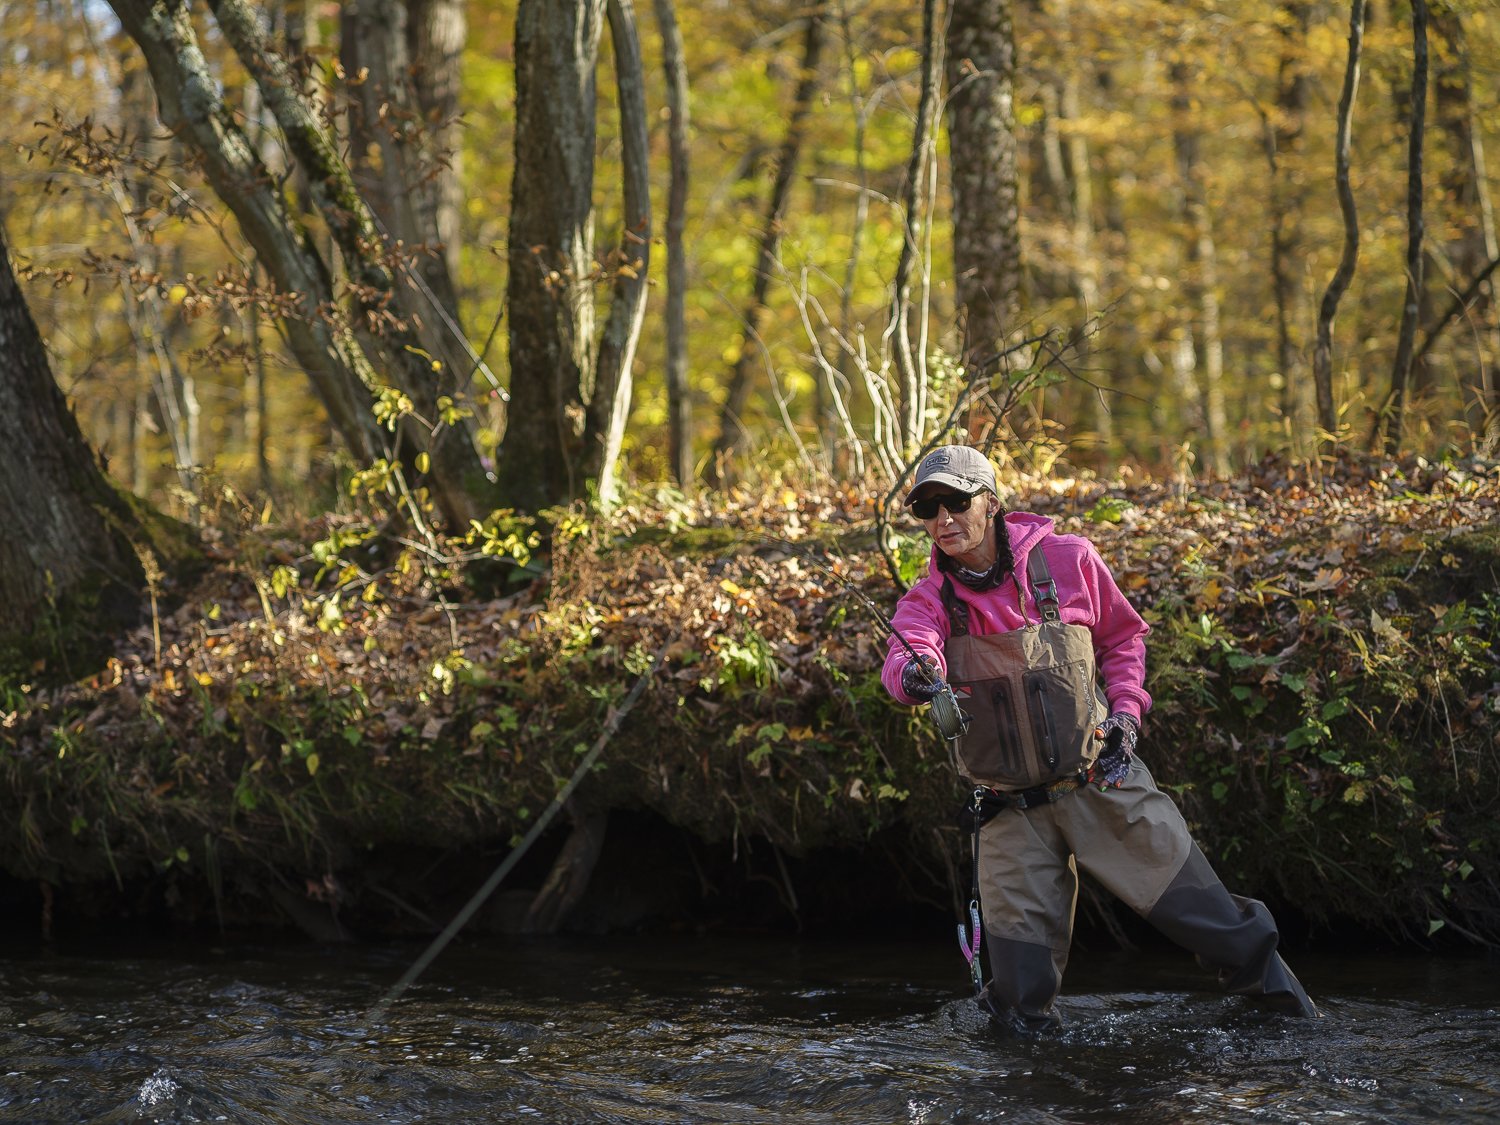  A female angler fishes on the Salmon River near Altmar, New York 